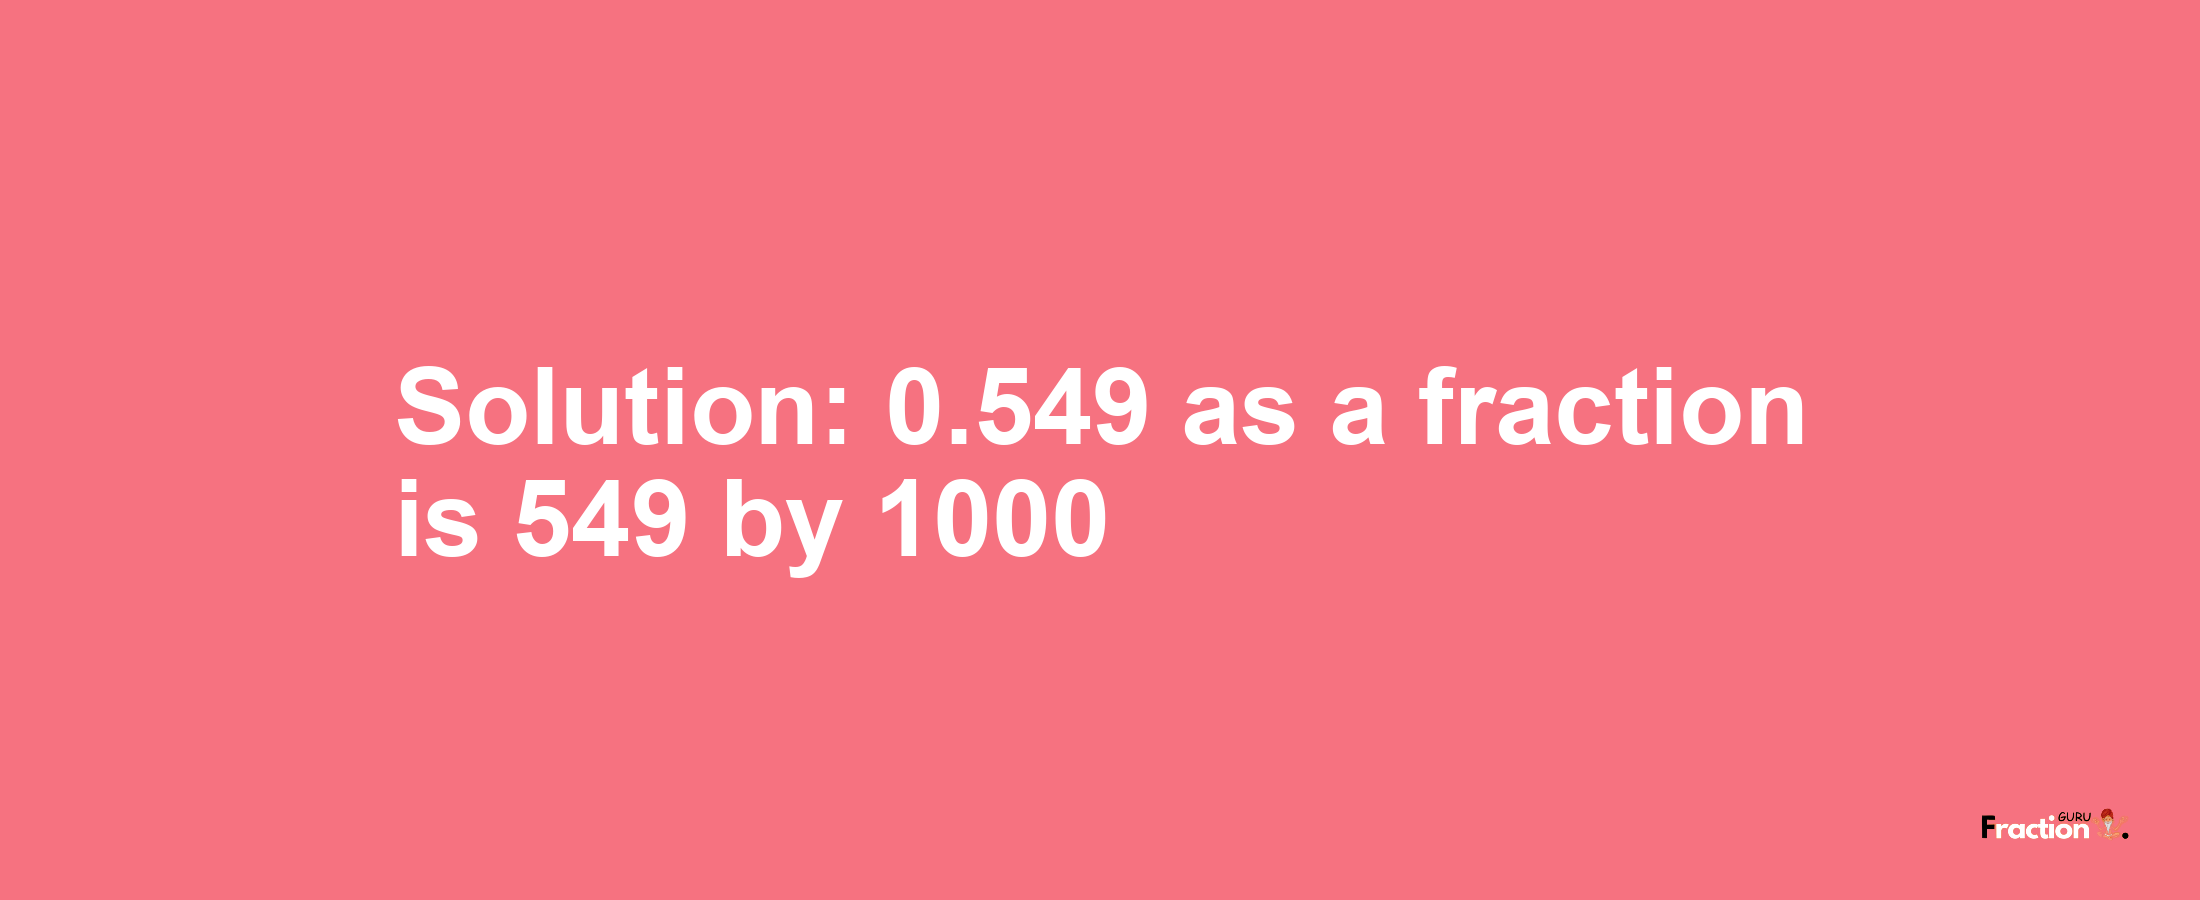 Solution:0.549 as a fraction is 549/1000